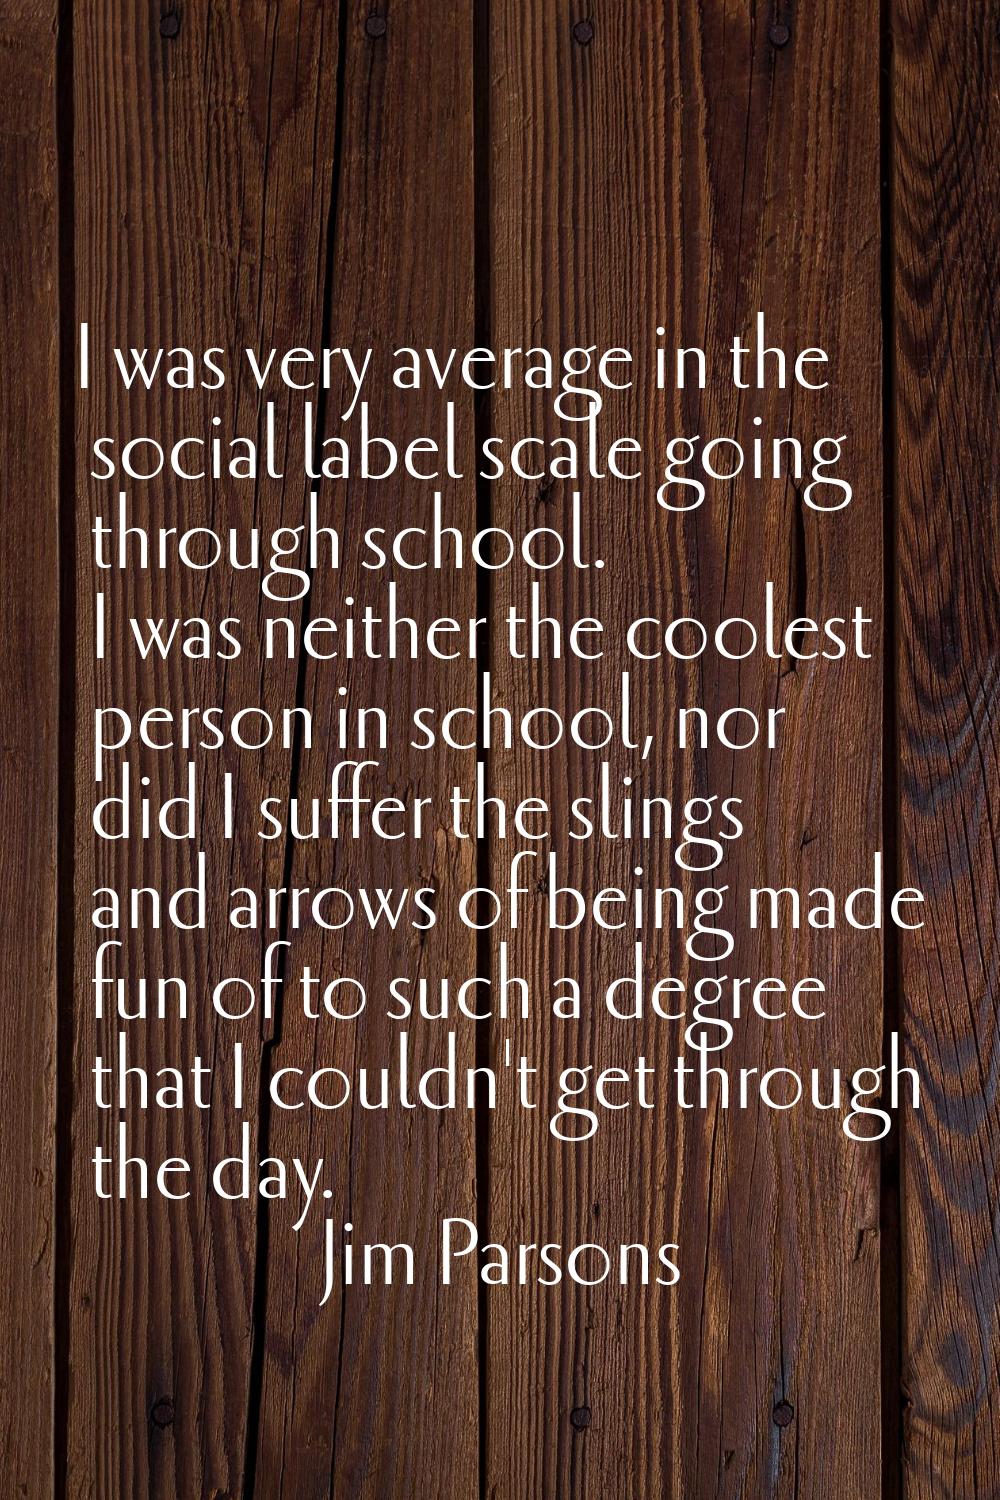 I was very average in the social label scale going through school. I was neither the coolest person